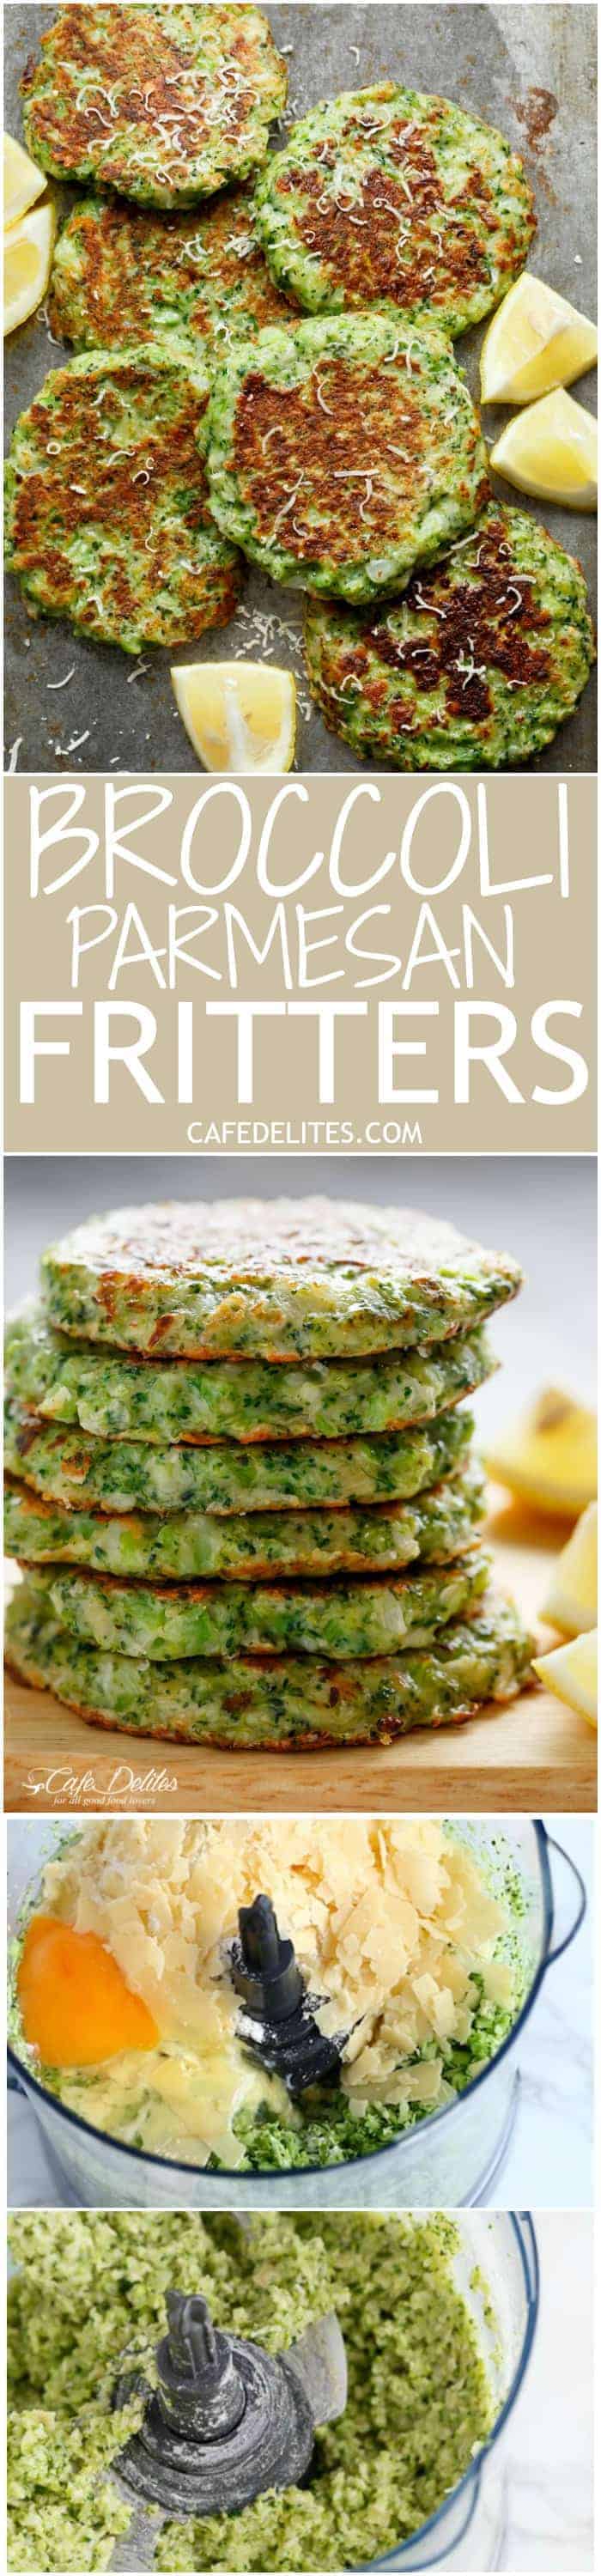 Crispy Broccoli Parmesan Fritters -- baked instead of fried -- is a great way to deliciously stash veggies for both children and adults! | https://cafedelites.com